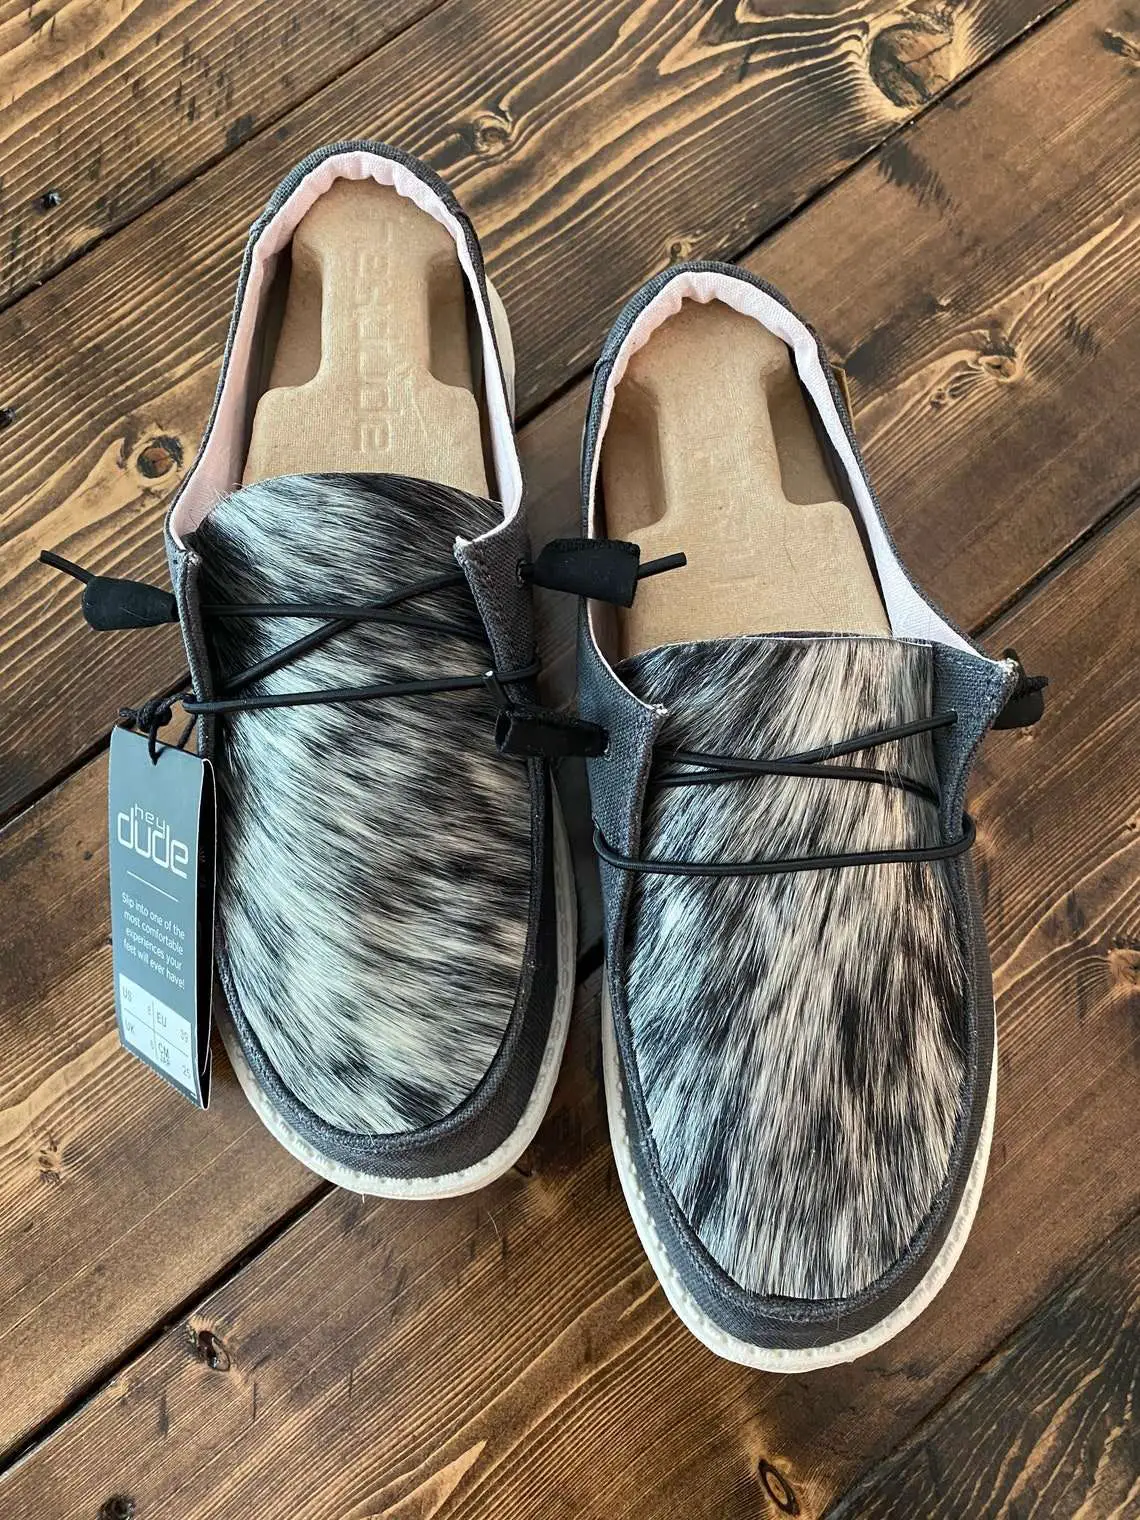 Cowhide Hey Dude Shoes MADE TO ORDER Hey Dude Shoes